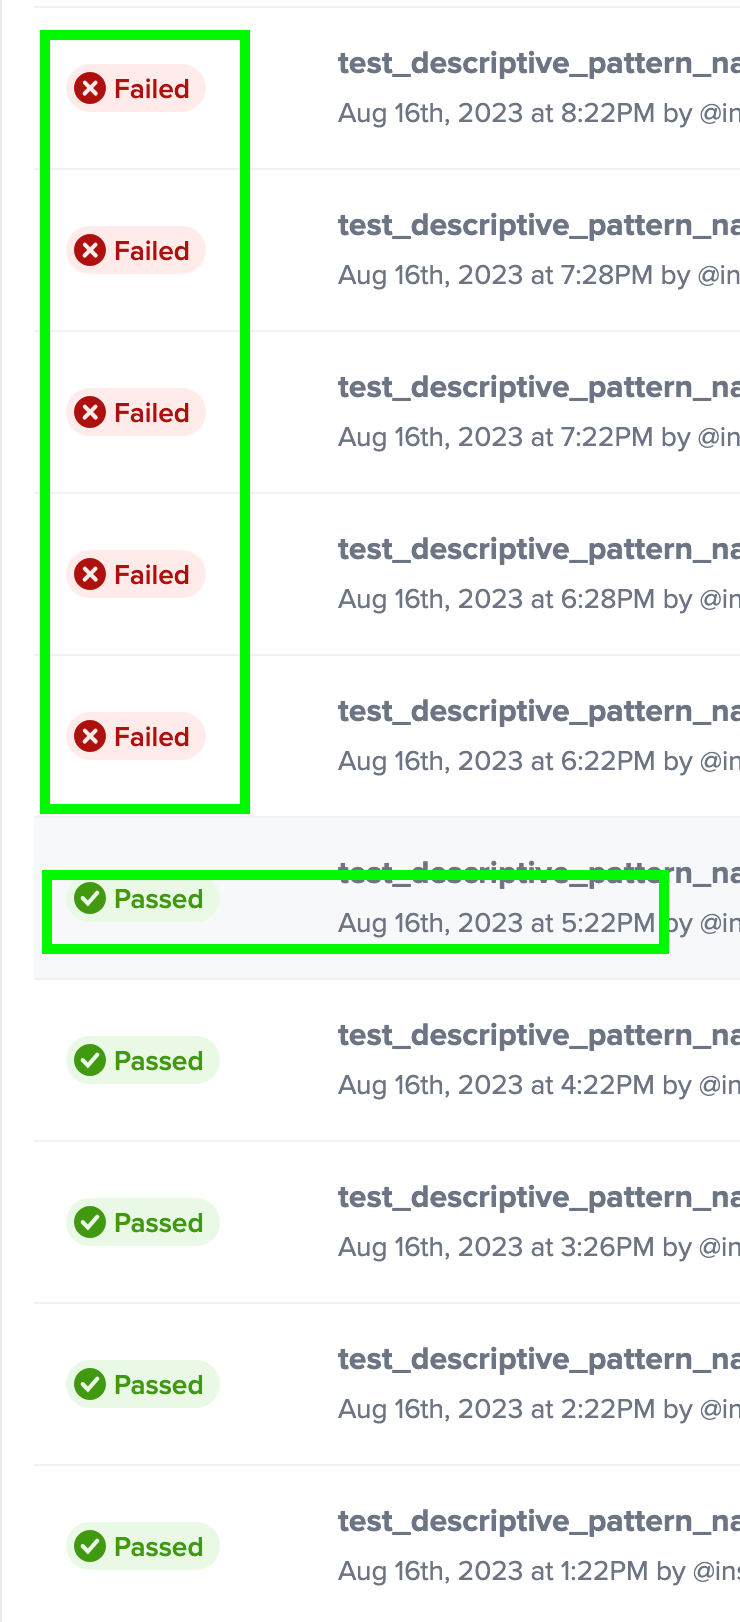 Test details showing when the test starts failing